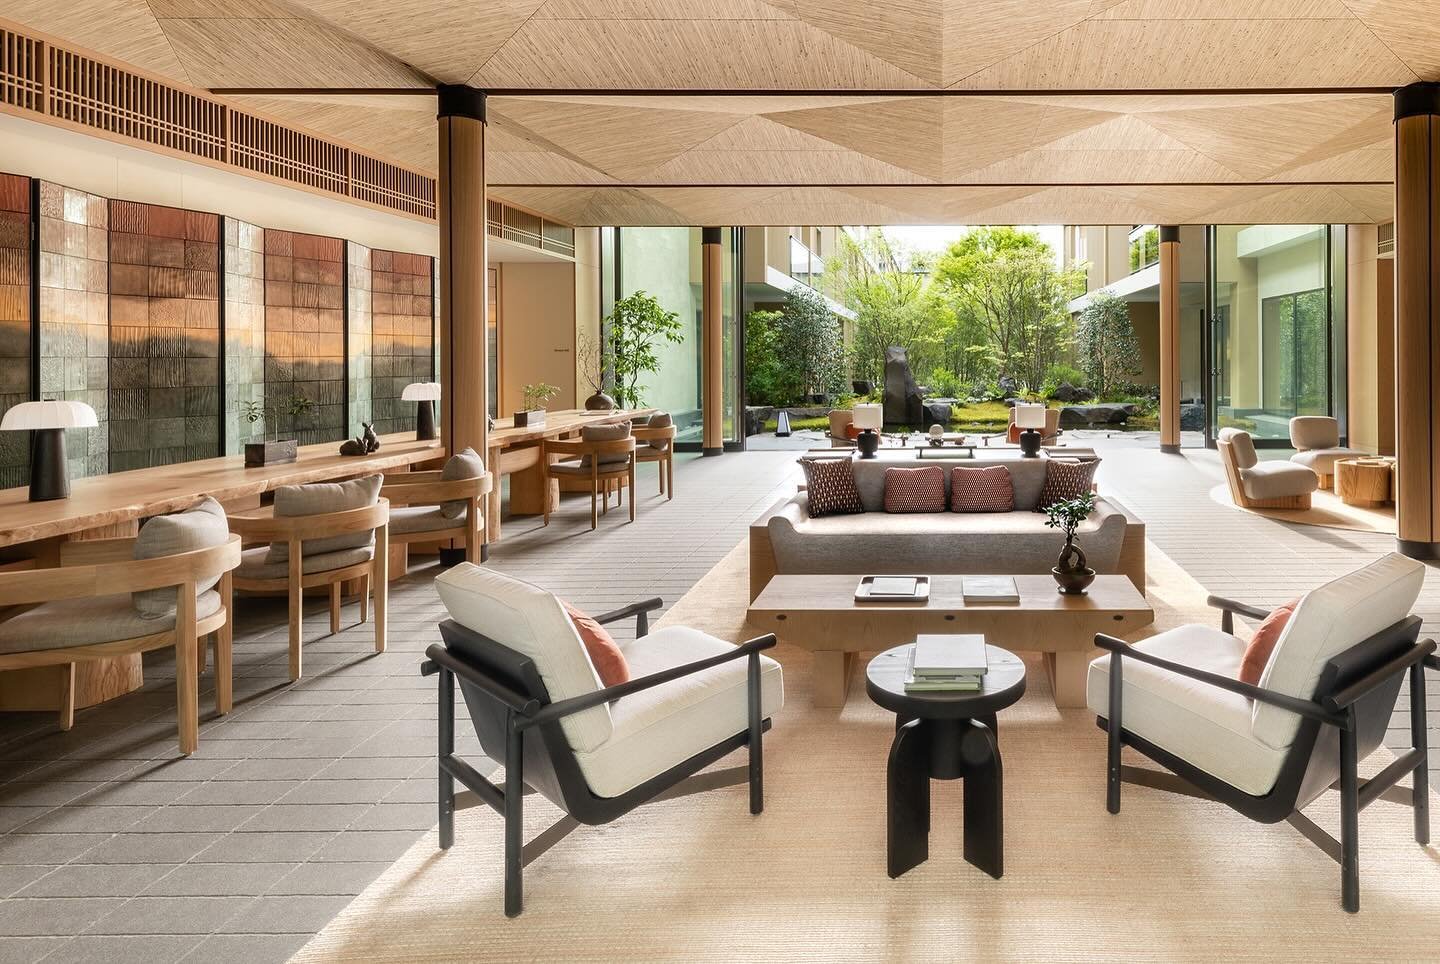 Introducing the new @sixsenseskyoto 🎌

This hotel marks @sixsenses debut in Japan featuring 81 guest-rooms and suites, with views of the internal courtyard, the city, or the garden of the famous 16th-century Toyokuni Shrine. 

Six Senses are known f